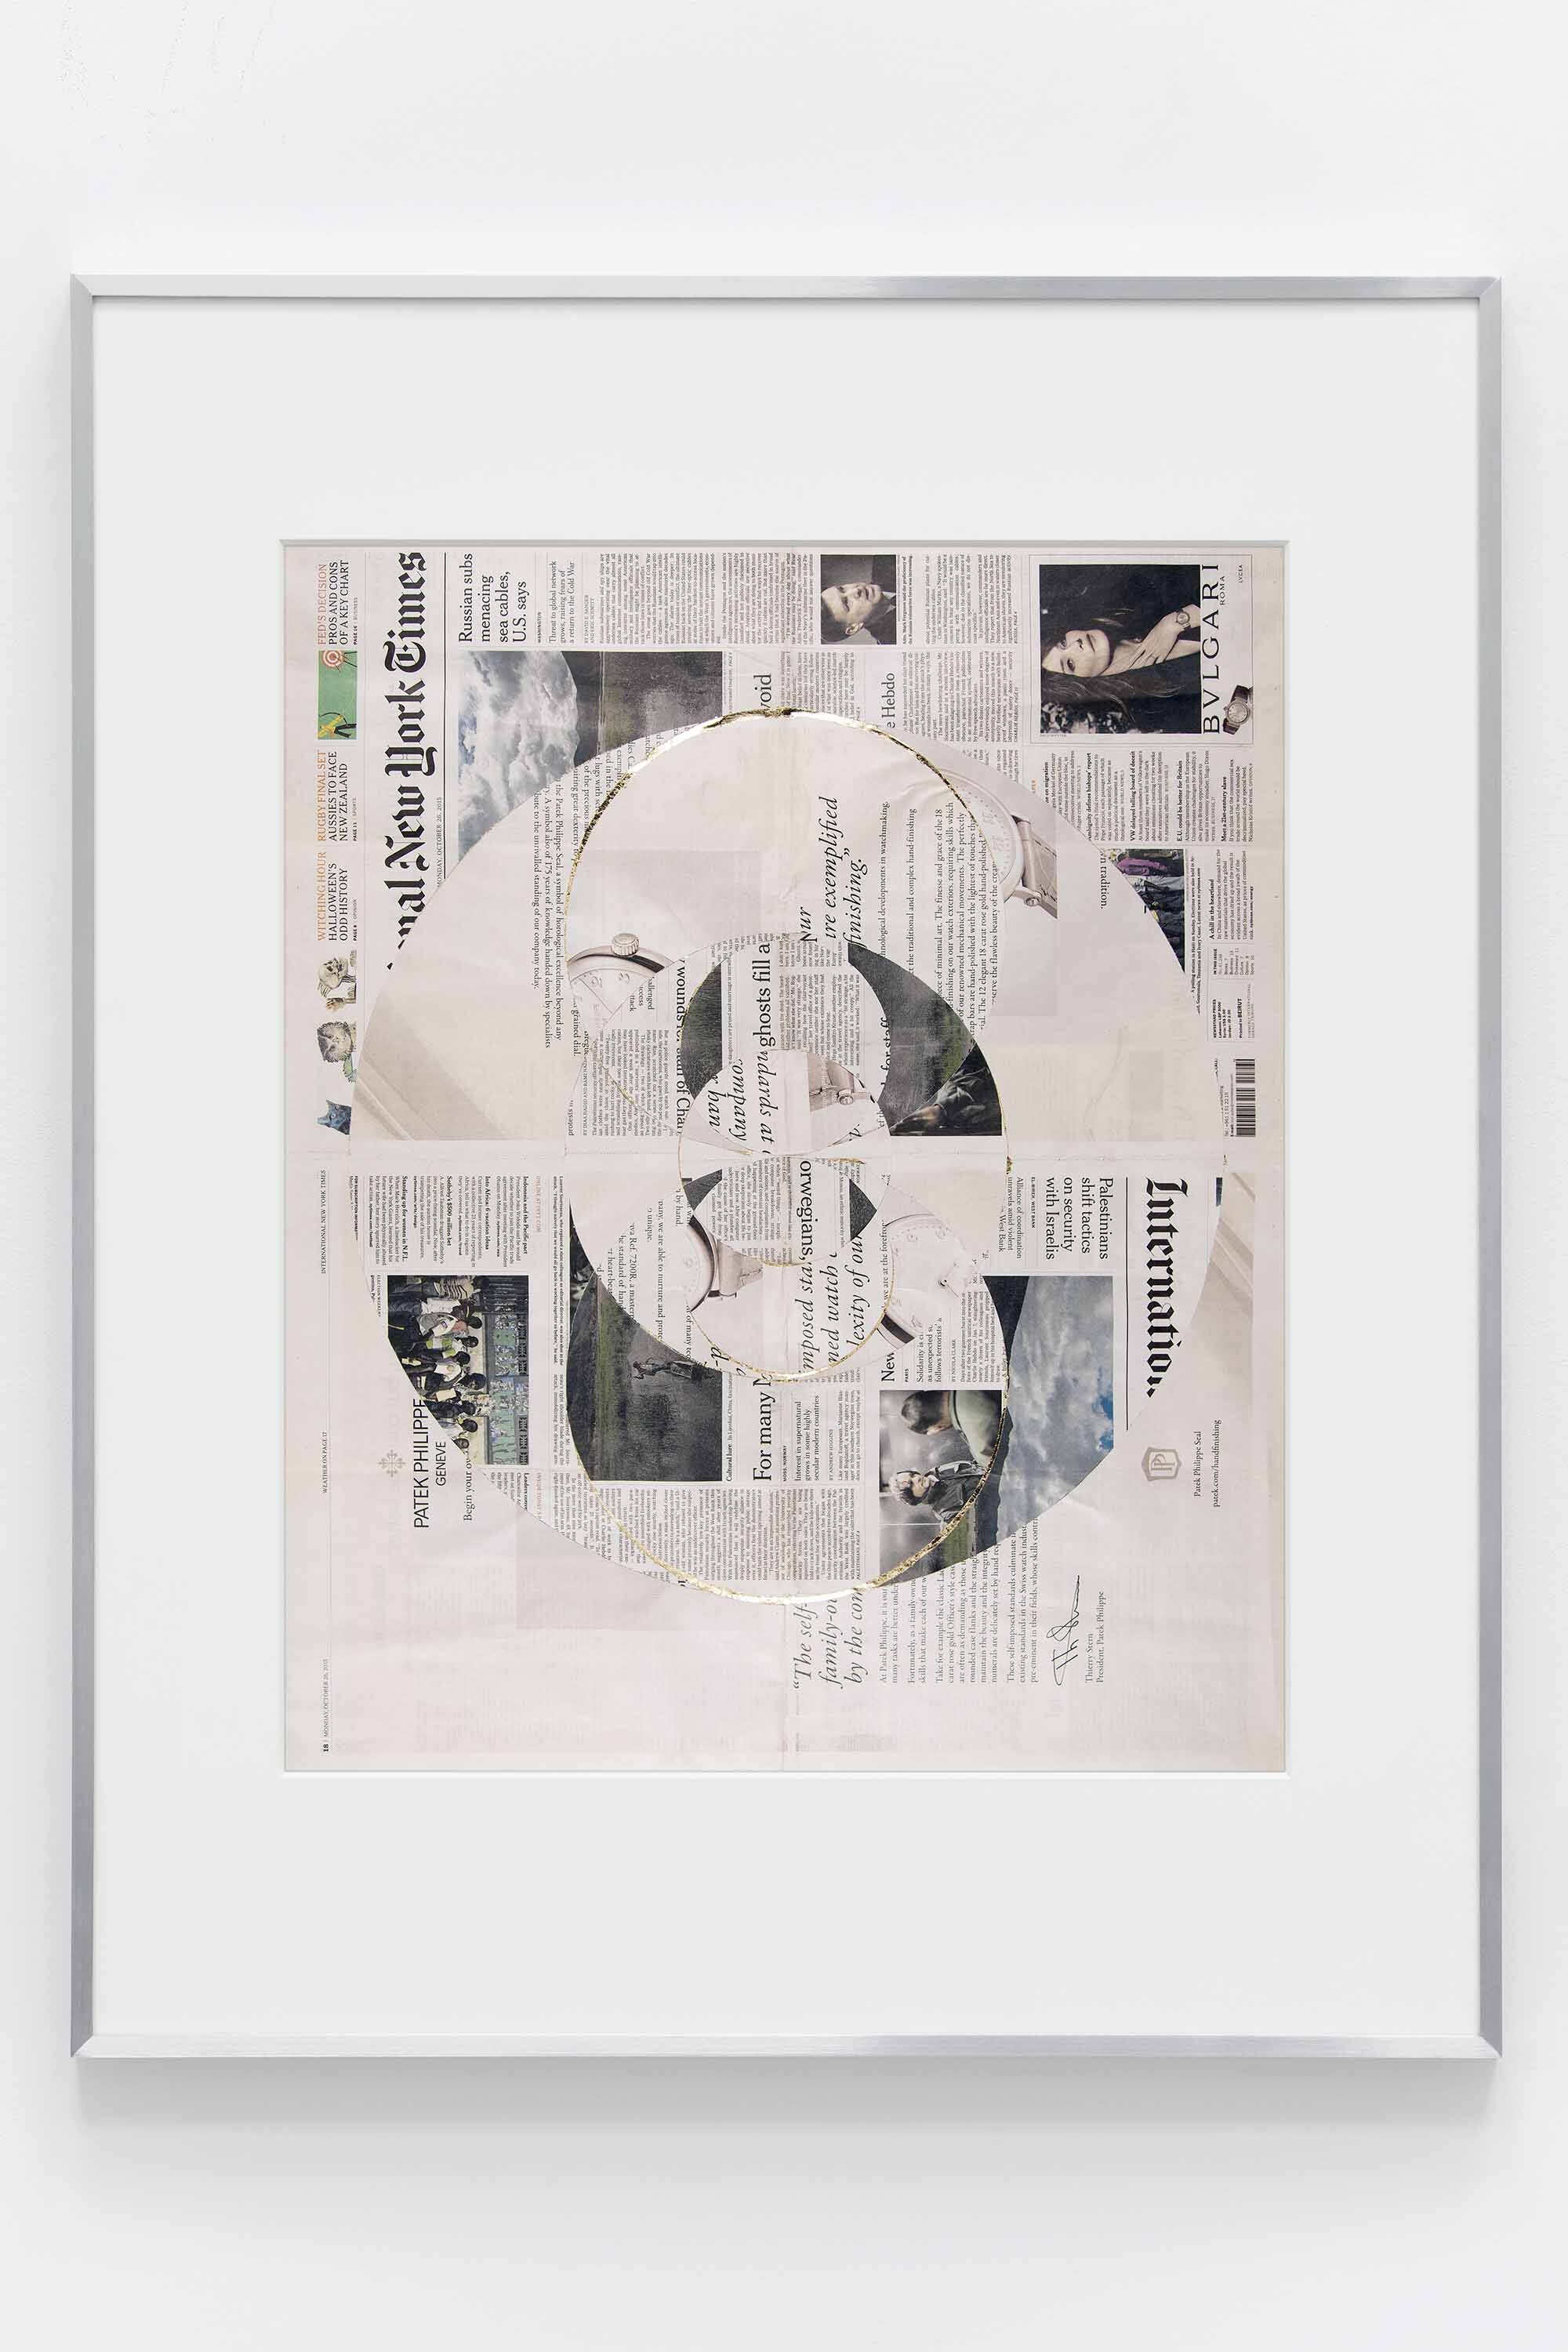   Blind Collage (Seven 180º Rotations, International New York Times: Beirut, Lebanon, Monday, October 26, 2015)   2021  Newspaper, tape, and 22 karat gold leaf  39 1/8 x 31 1/4 inches   Blind Collages, 2017–   Exhibition:   Foreign Correspondence, 20